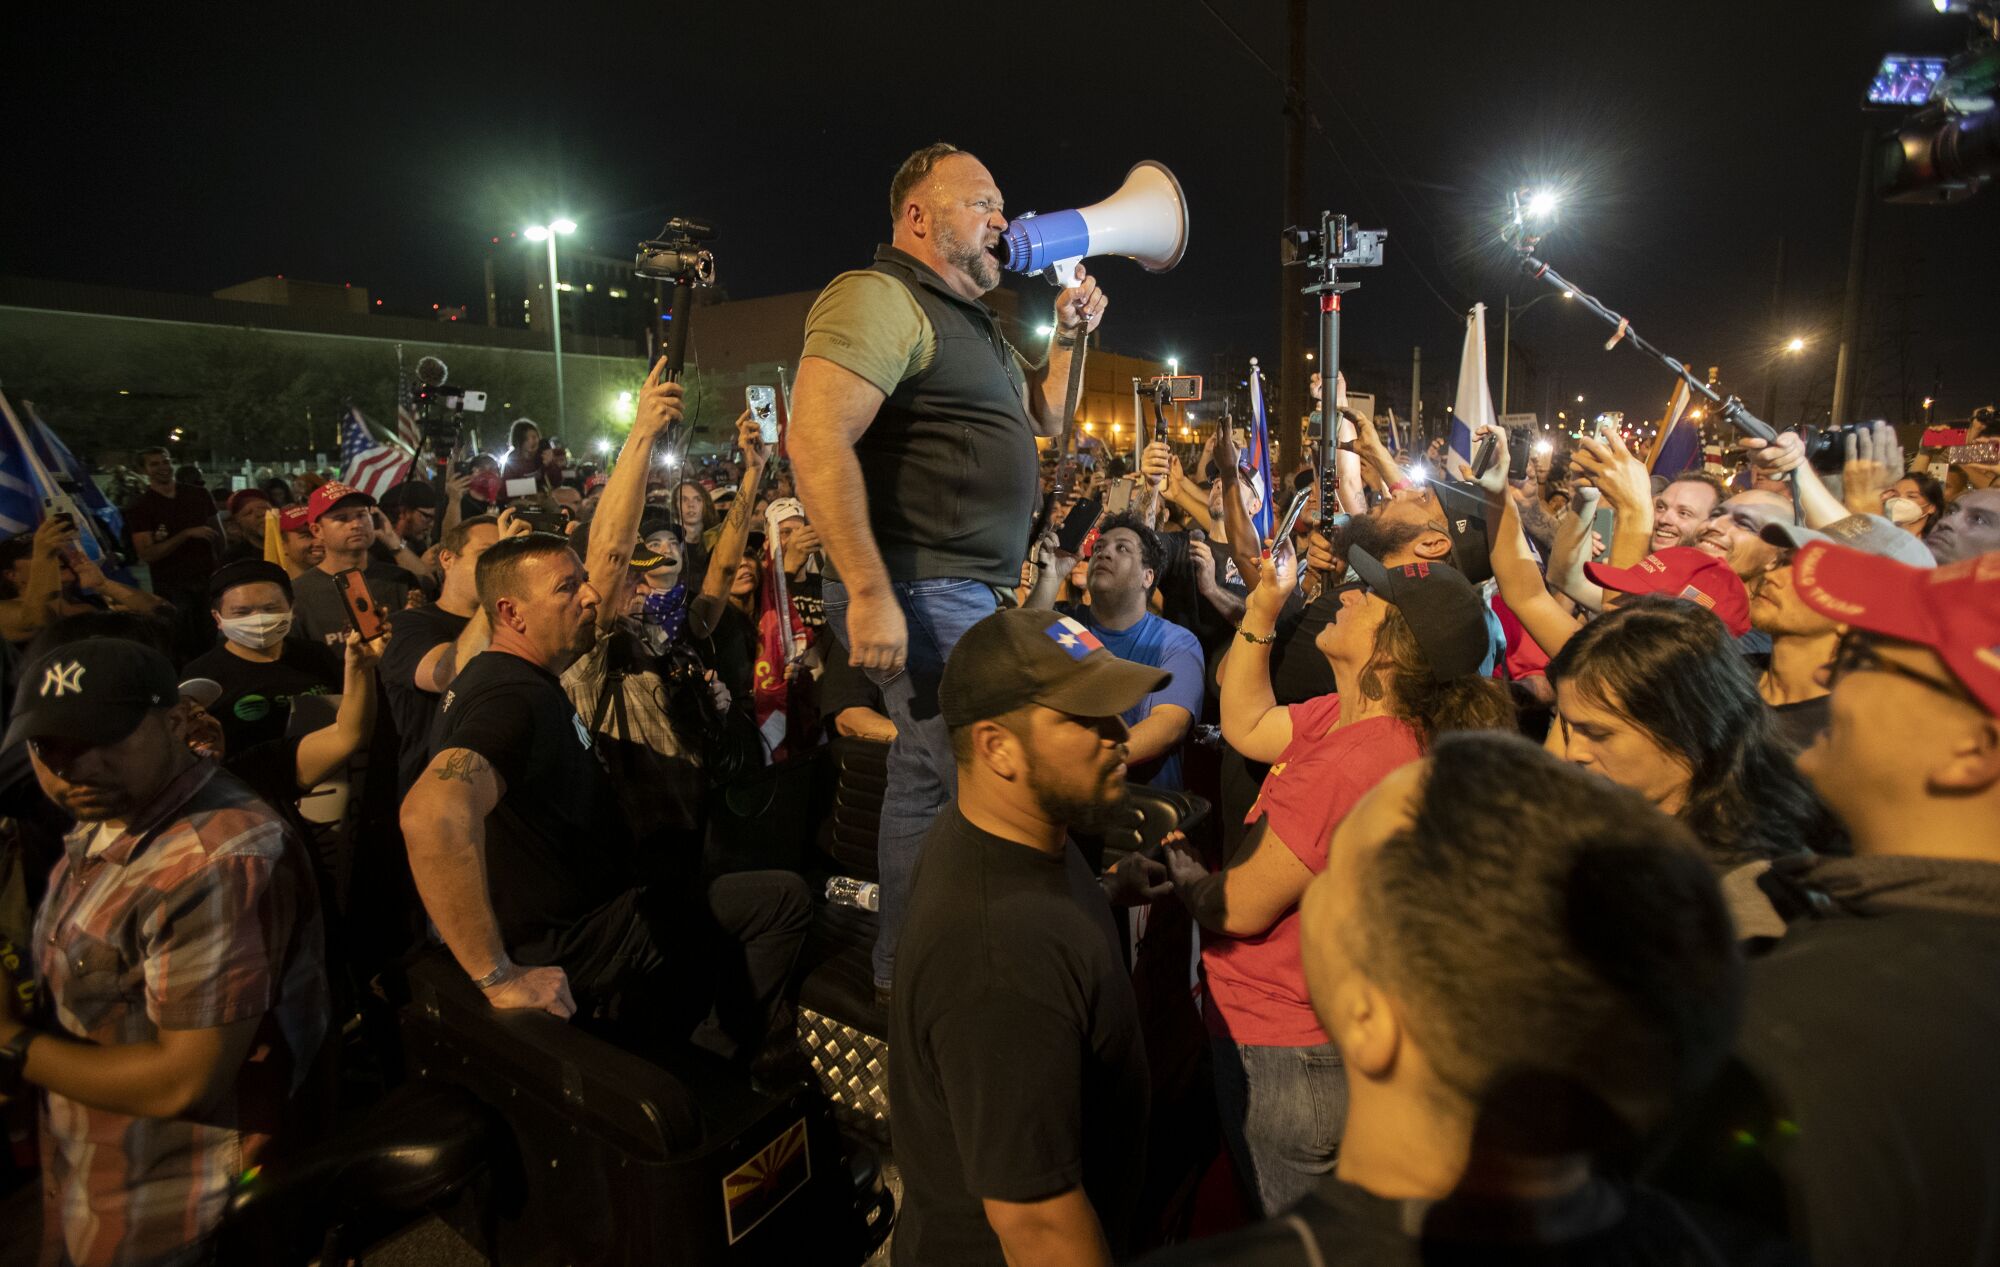 Far-right radio host and conspiracy theorist Alex Jones rallies the crowd of Trump supporters.